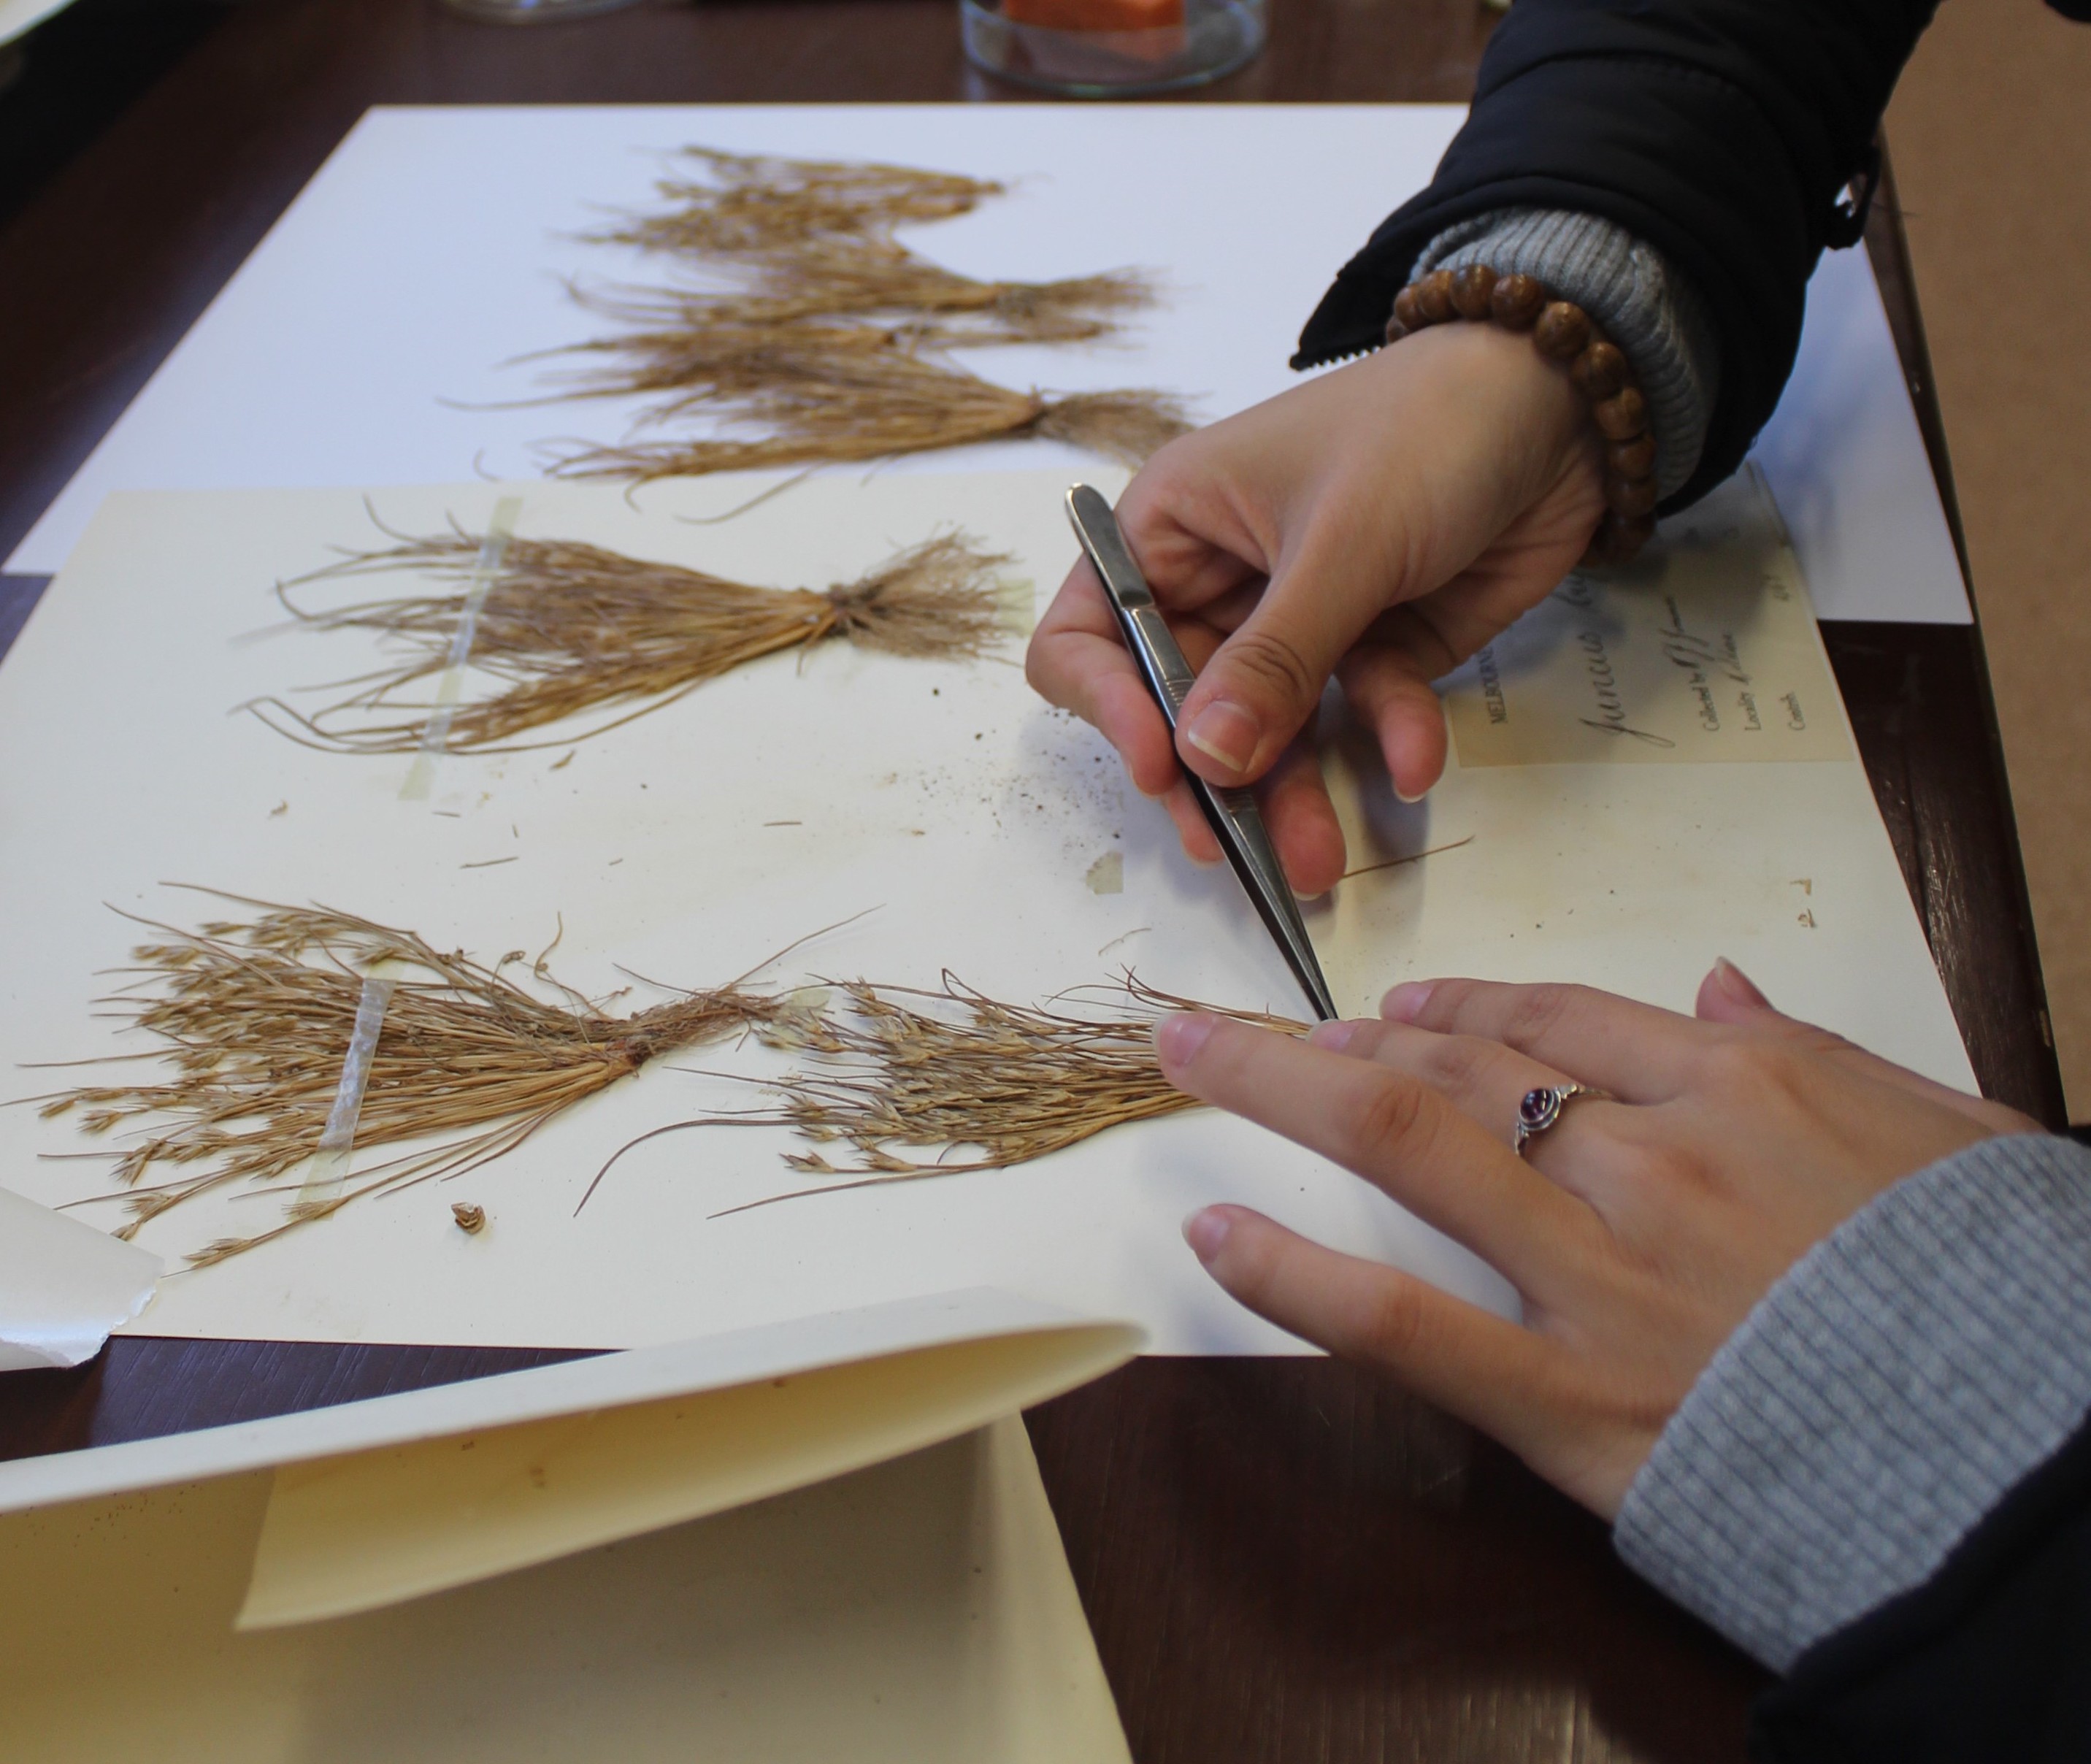 Young woman using conservation tools to examine dried grasses secured to paper, with writing describing the types of plants preserved.